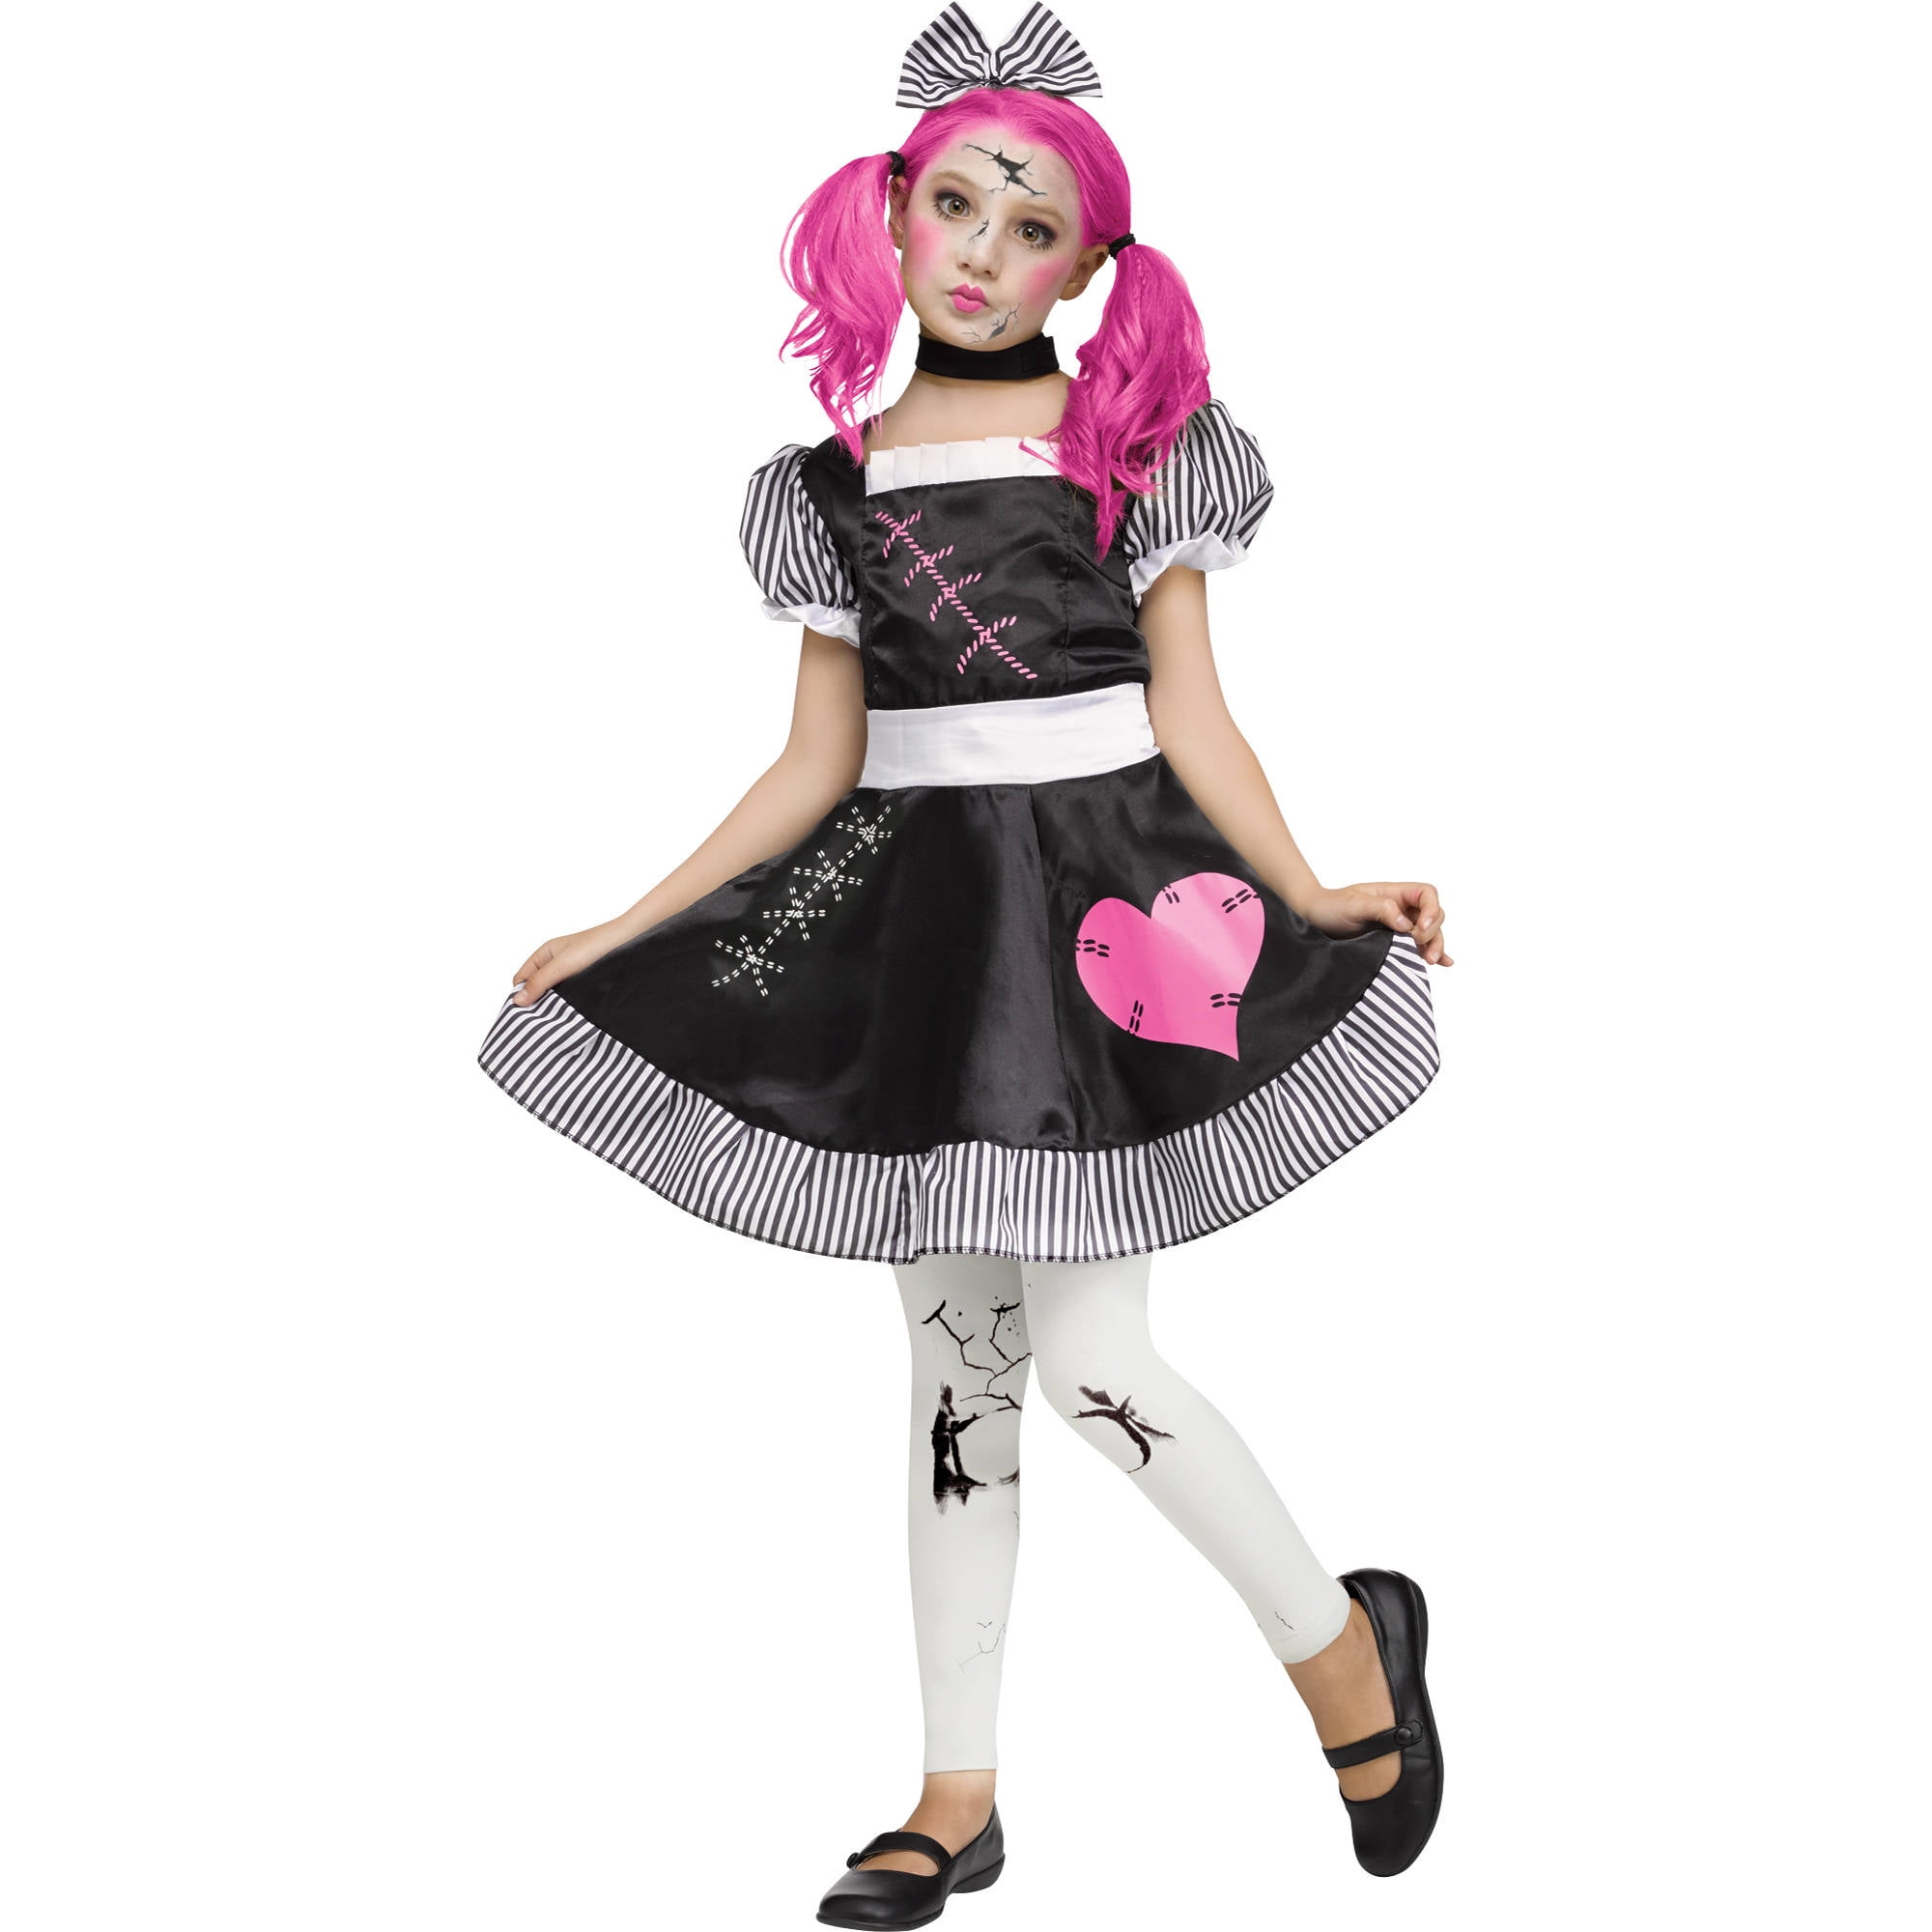 BROKEN DOLL COSTUME ADULT OR CHILDS HALLOWEEN HORROR SCARY FANCY DRESS OUTFIT 